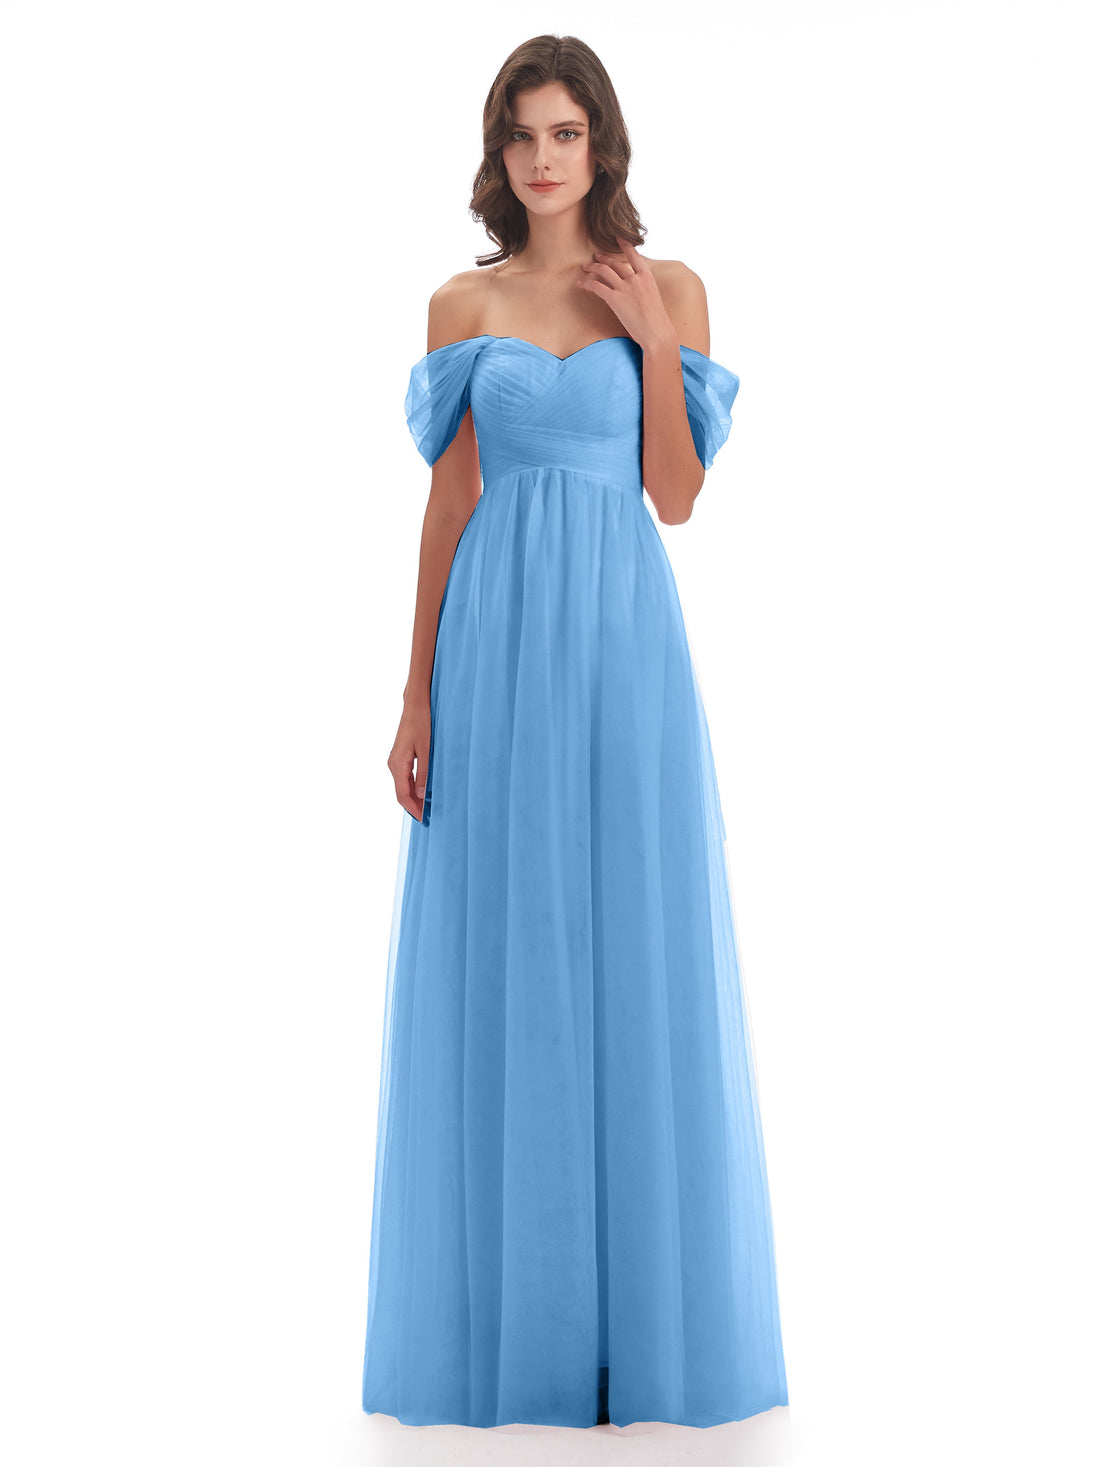 Aria Elegant Off The Shoulder Chiffoon Long Bridesmaid Dresses With Tu